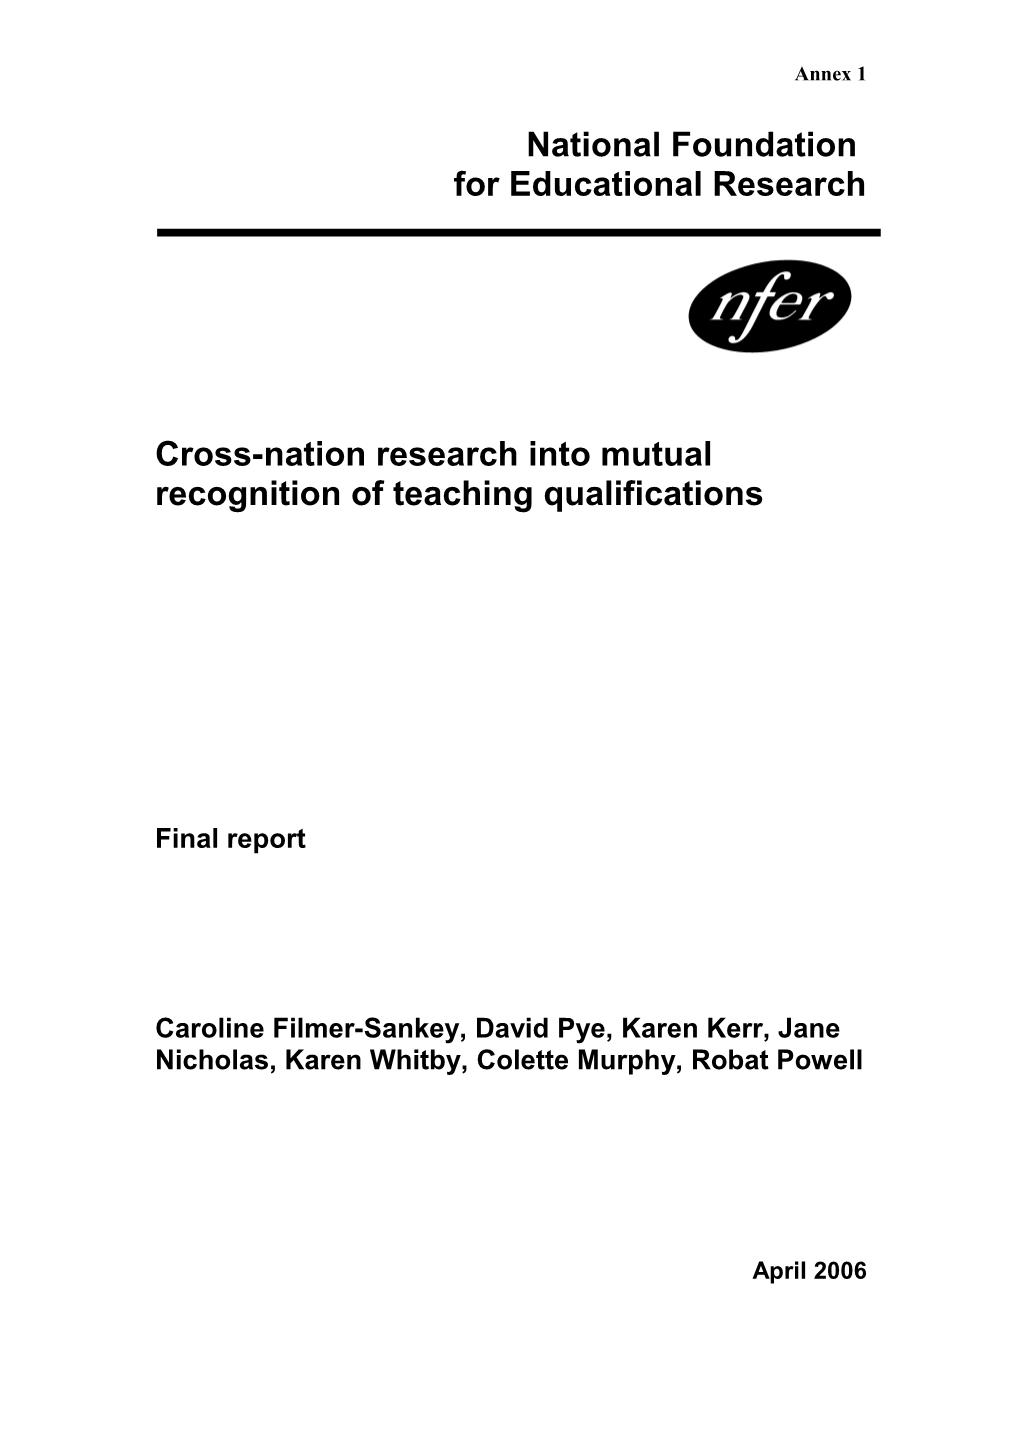 Cross-Nation Research Into Mutual Recognition of Teaching Qualifications